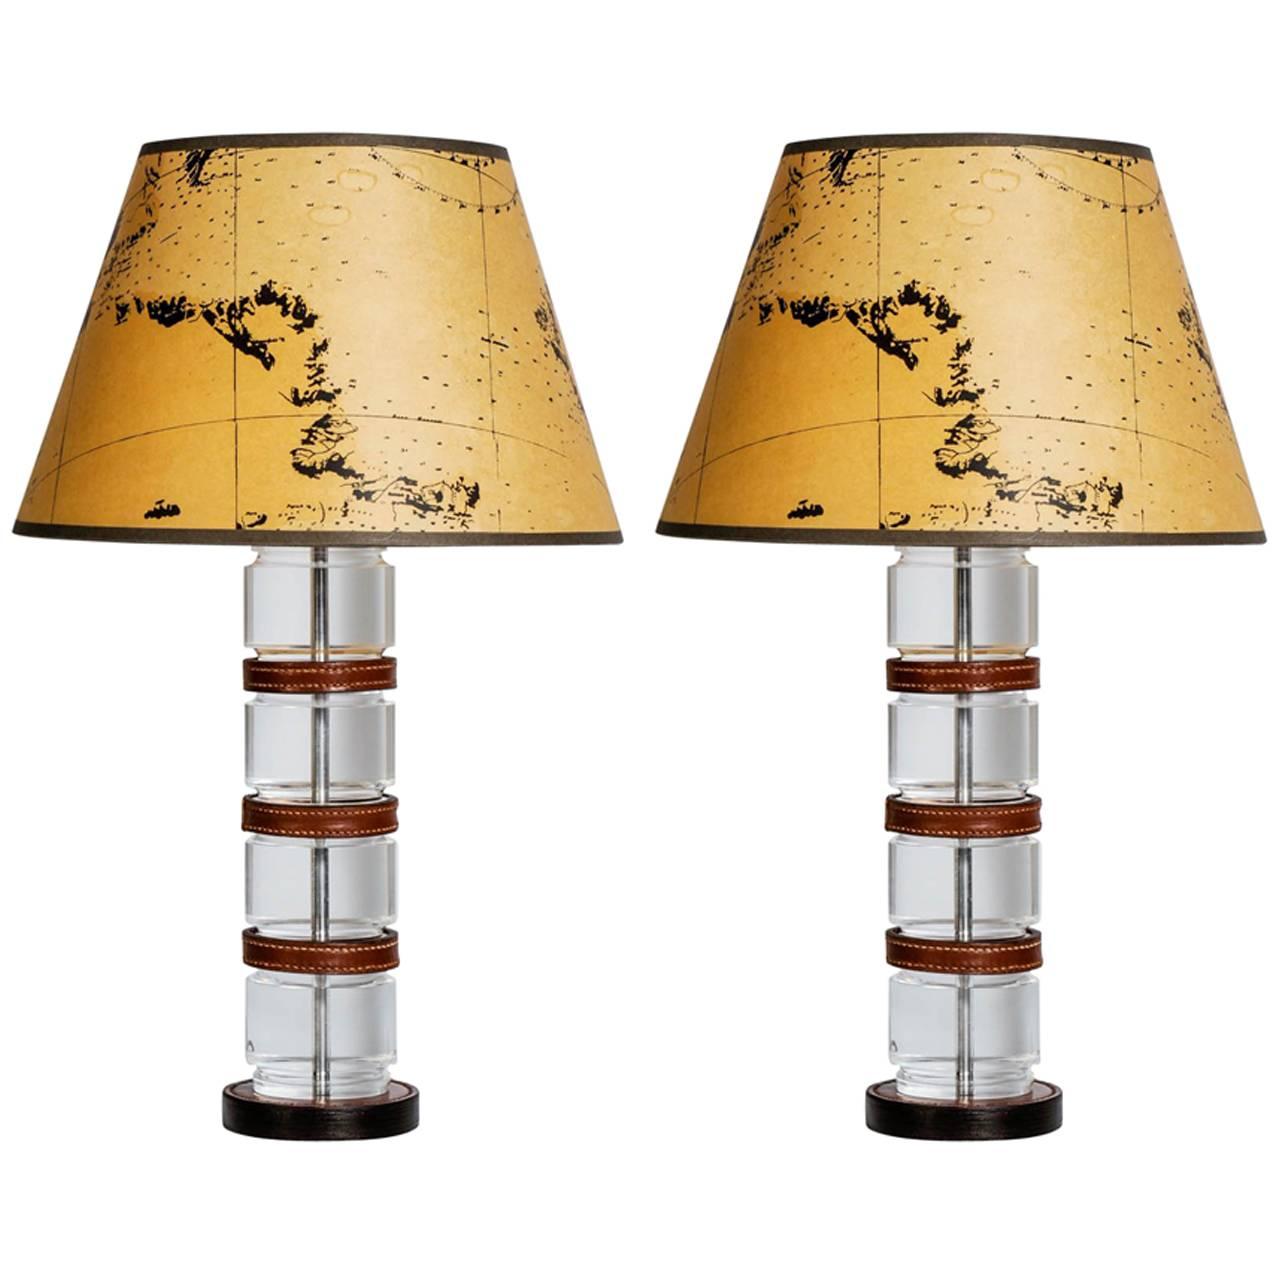 Pair of Lucite and Stitched Leather Lamps by Hermès, Paris